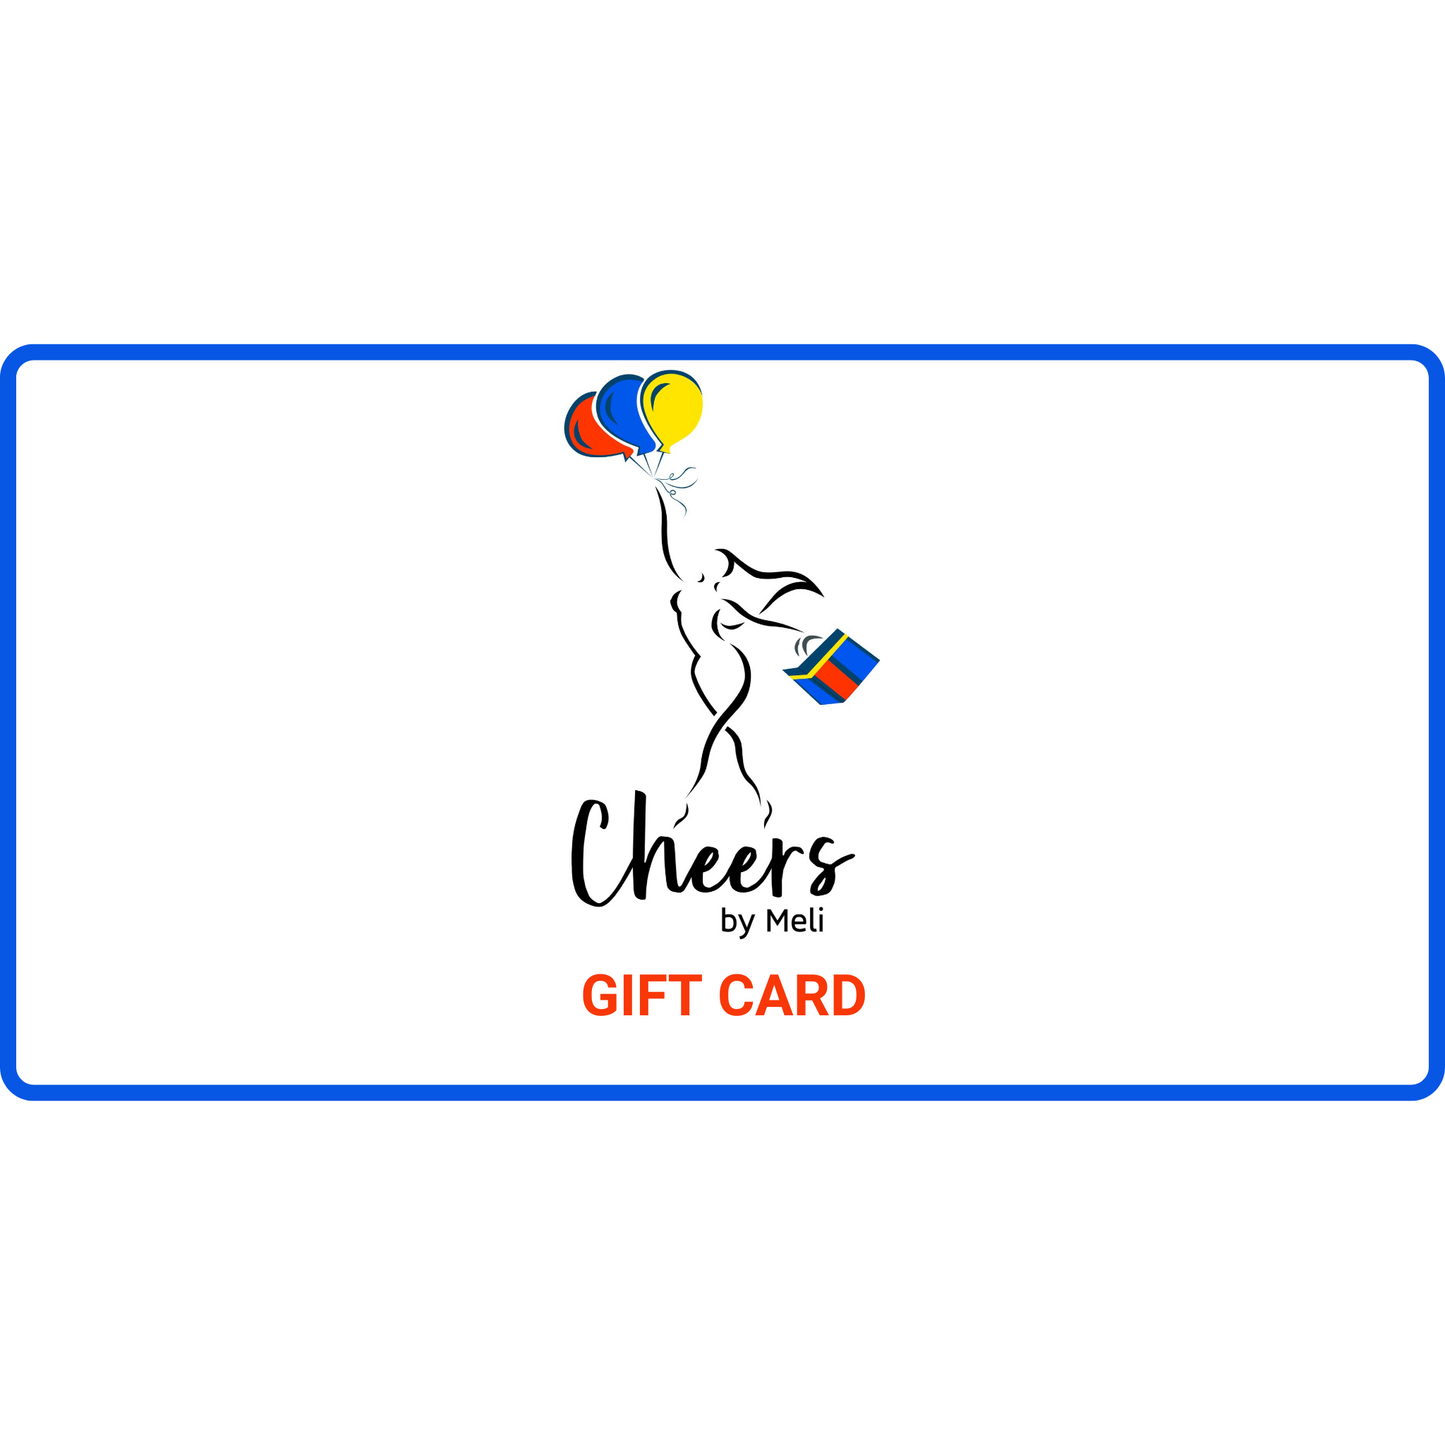 Cheers by Meli Gift Card